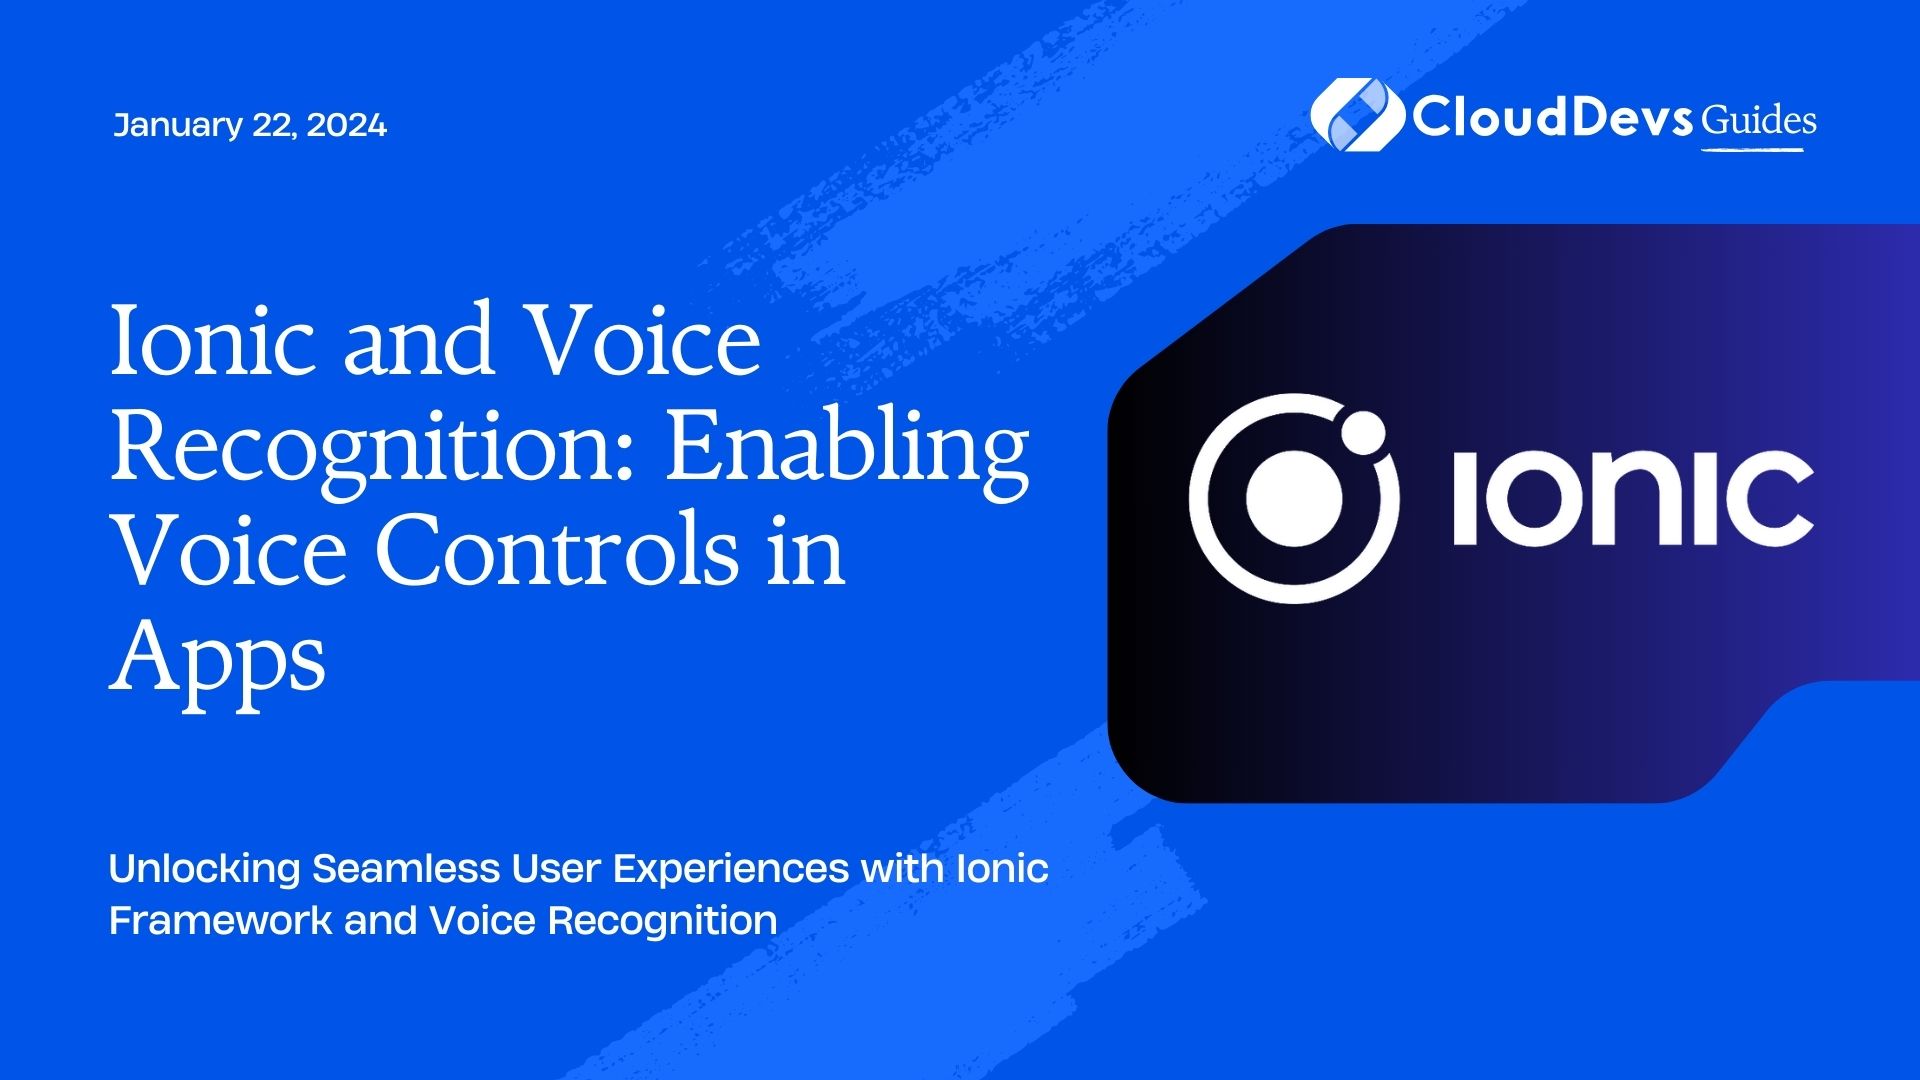 Ionic and Voice Recognition: Enabling Voice Controls in Apps